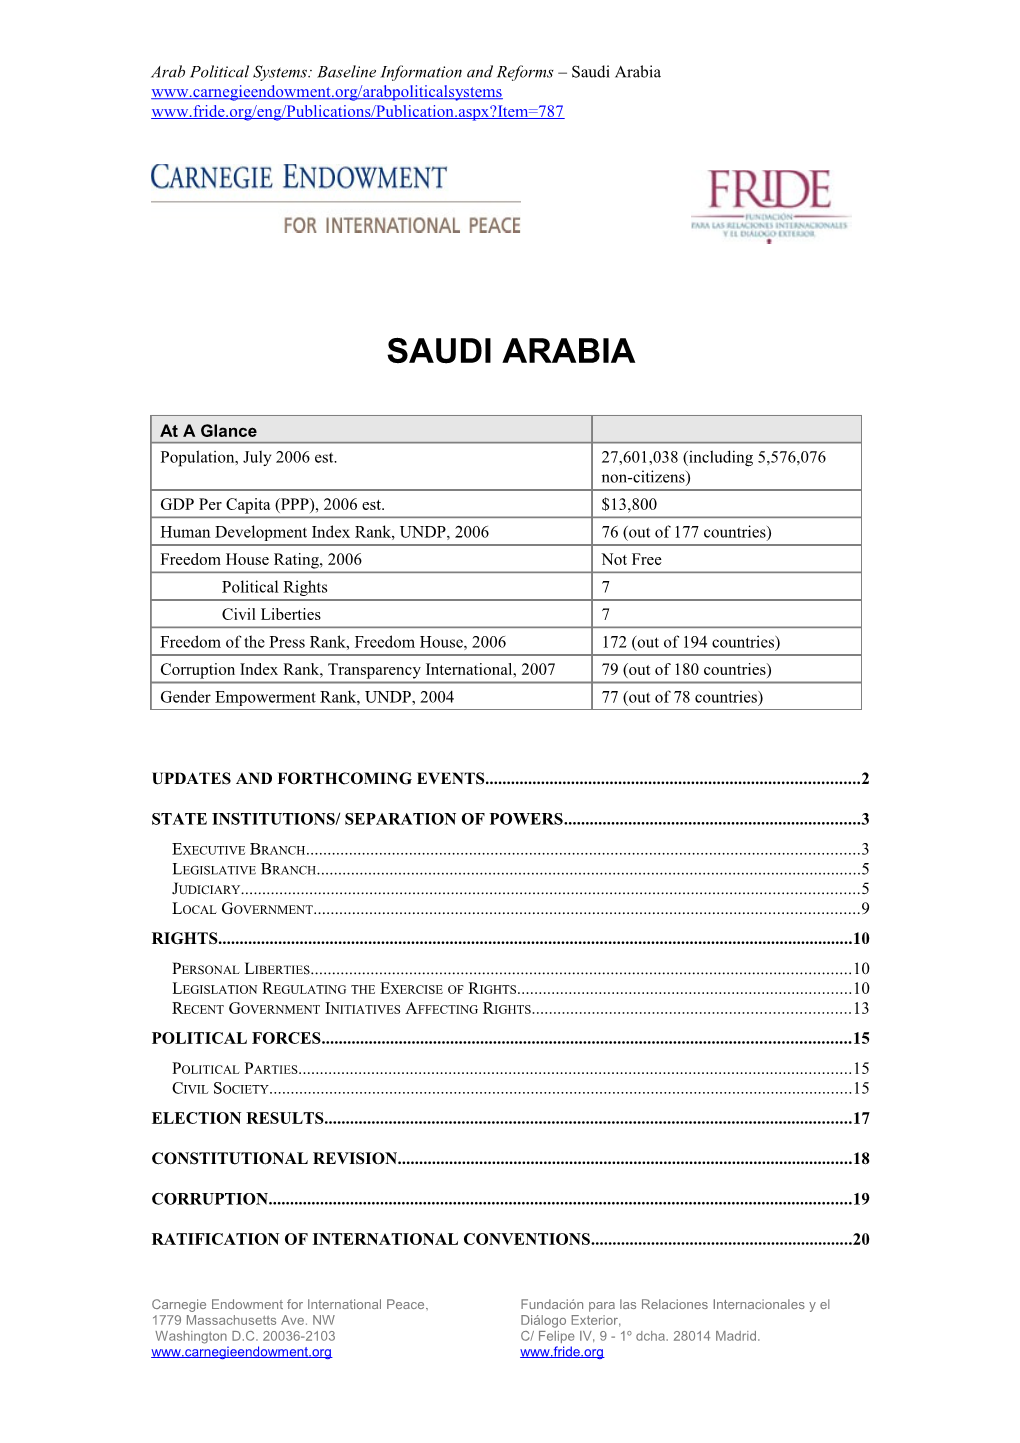 Arab Political Systems: Baseline Information and Reforms Saudi Arabia